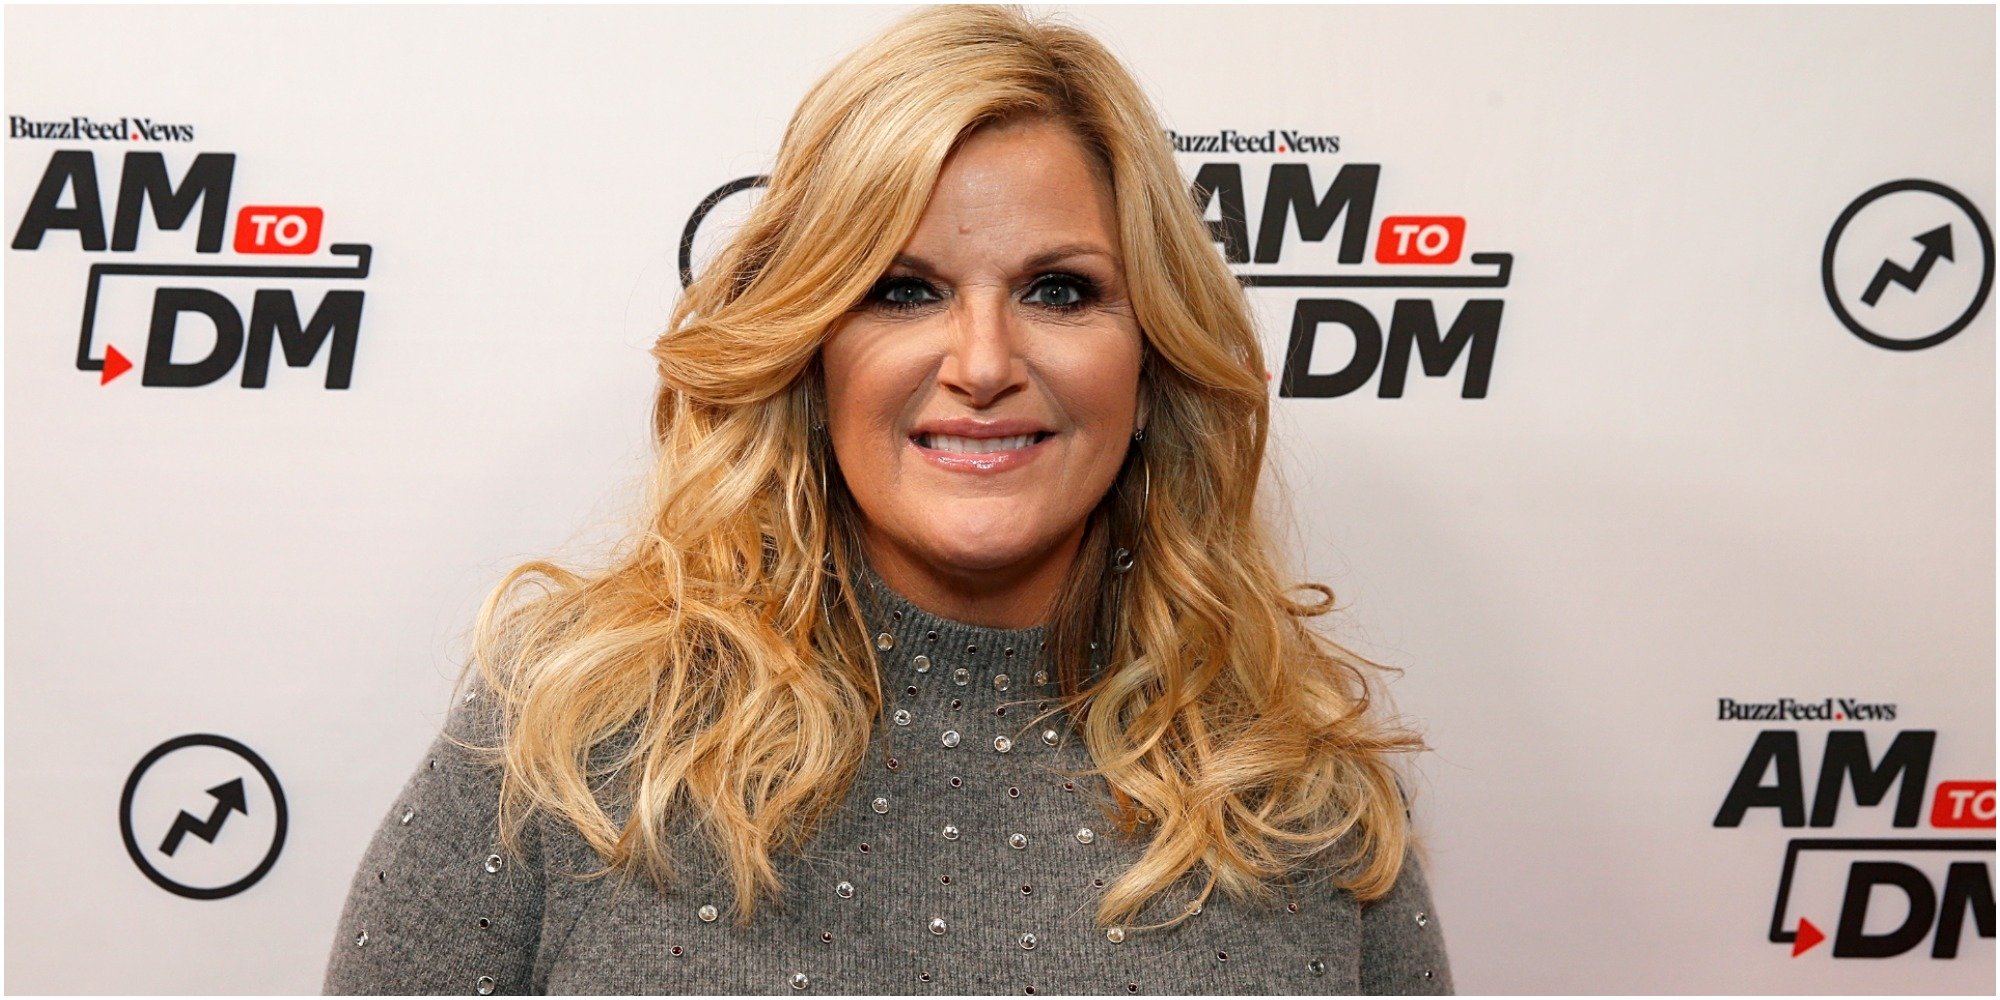 trisha yearwood poses at a red carpet event.